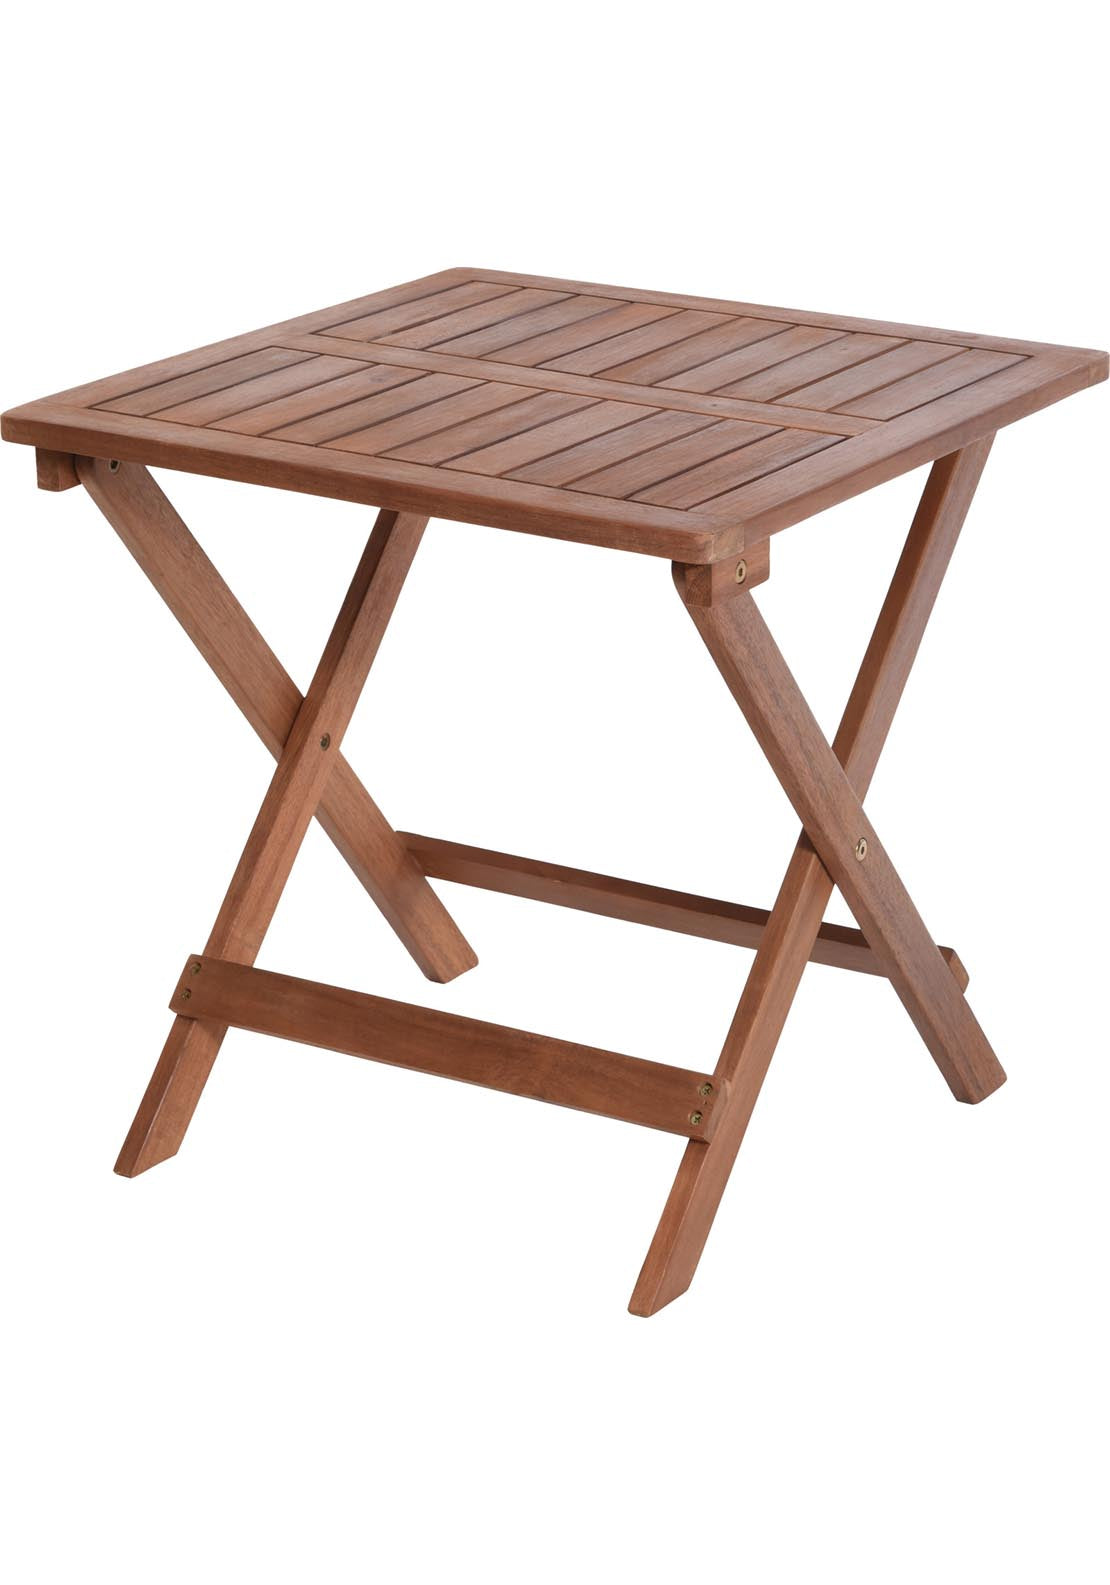 The Home Garden Acacia Wood Foldable Table 1 Shaws Department Stores